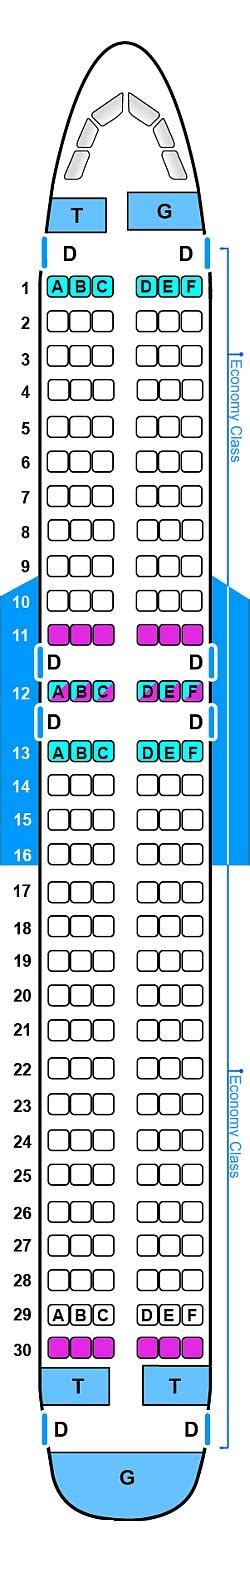 Avianca Airbus A320 Seat Map